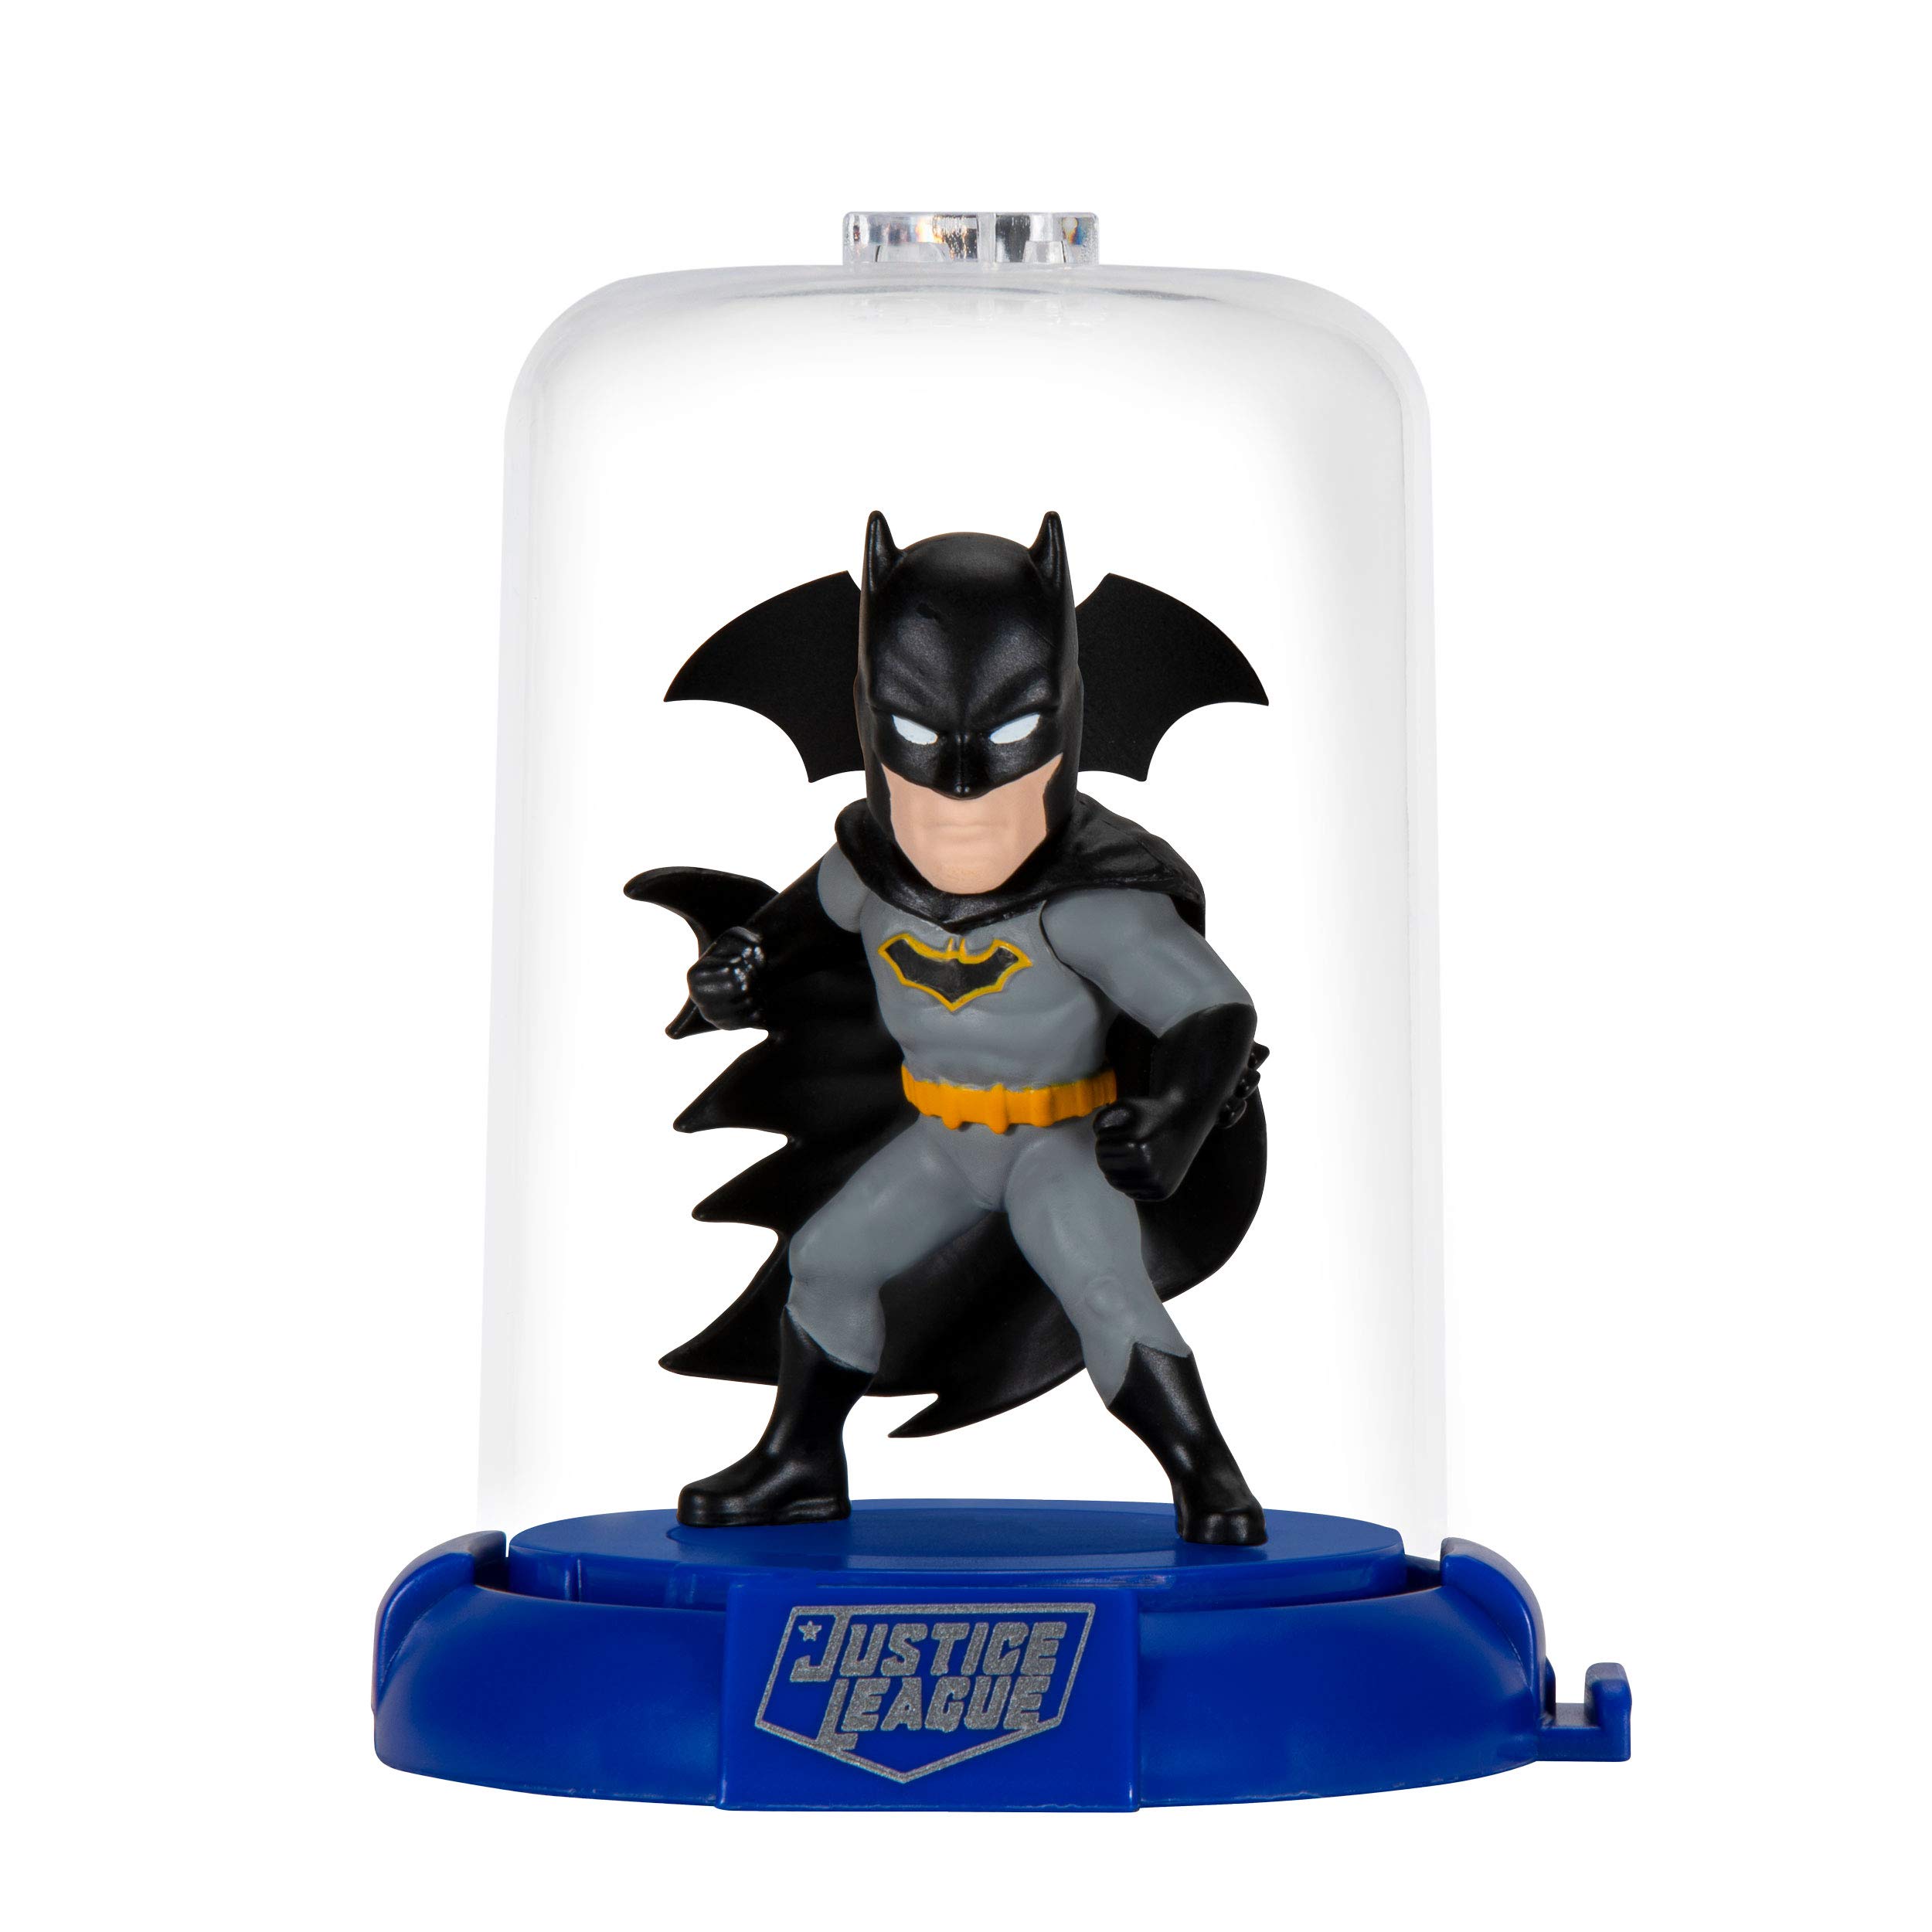 Justice League Domez Series 1 Collector’s Box Set - Includes Batman, Superman, Wonder Woman & The Flash - Authentic & Highly Detailed Collectible Characters - Connect, Collect, Display